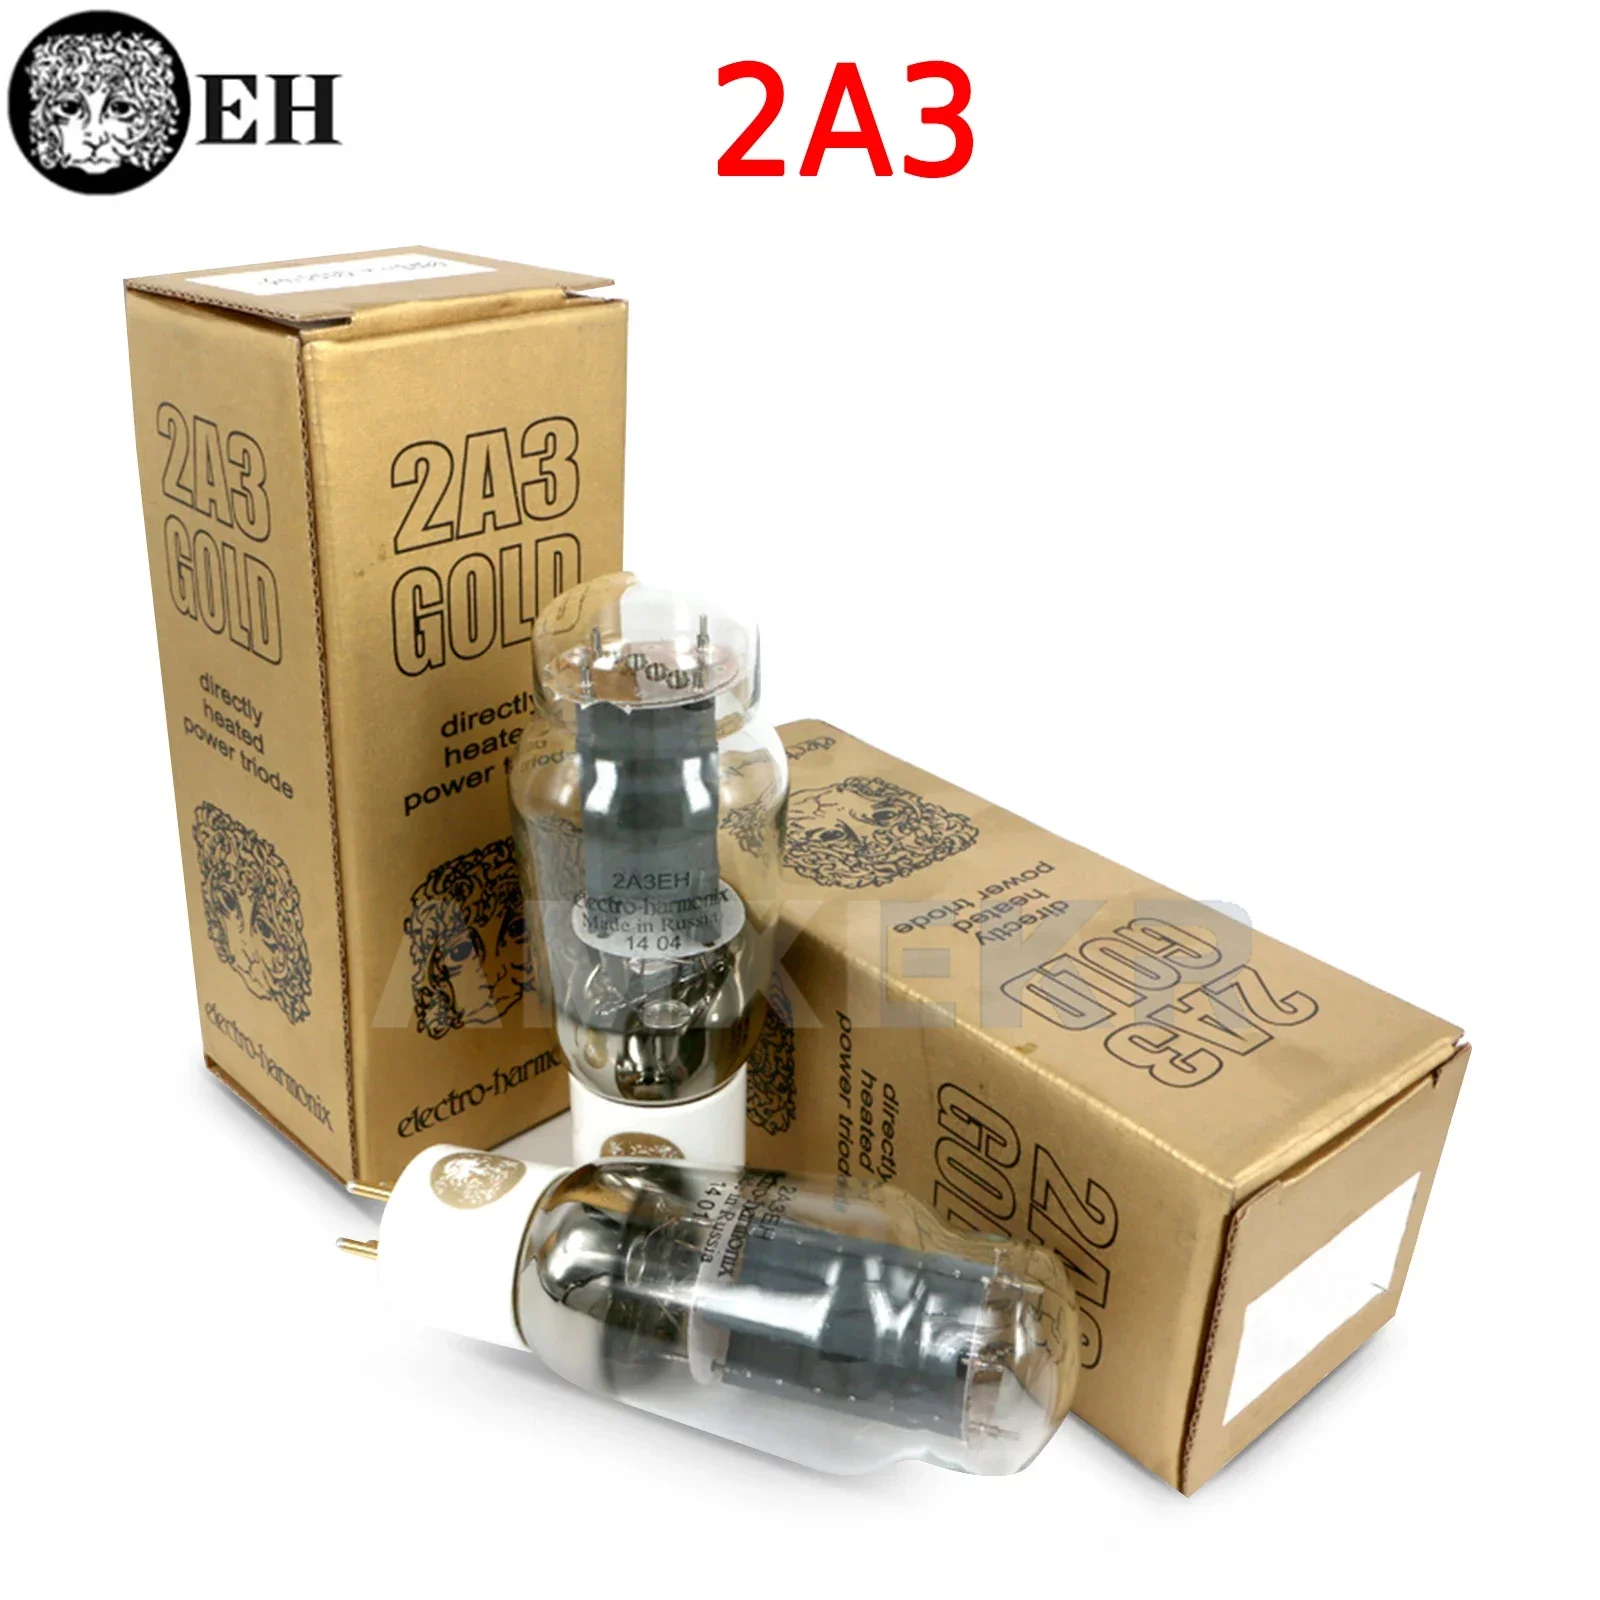 

Russia EH 2A3 Vacuum Tube Valve Golden Feet 2A3 Tube Amplifier Kit DIY Audio Amp Precision Matched Genuine